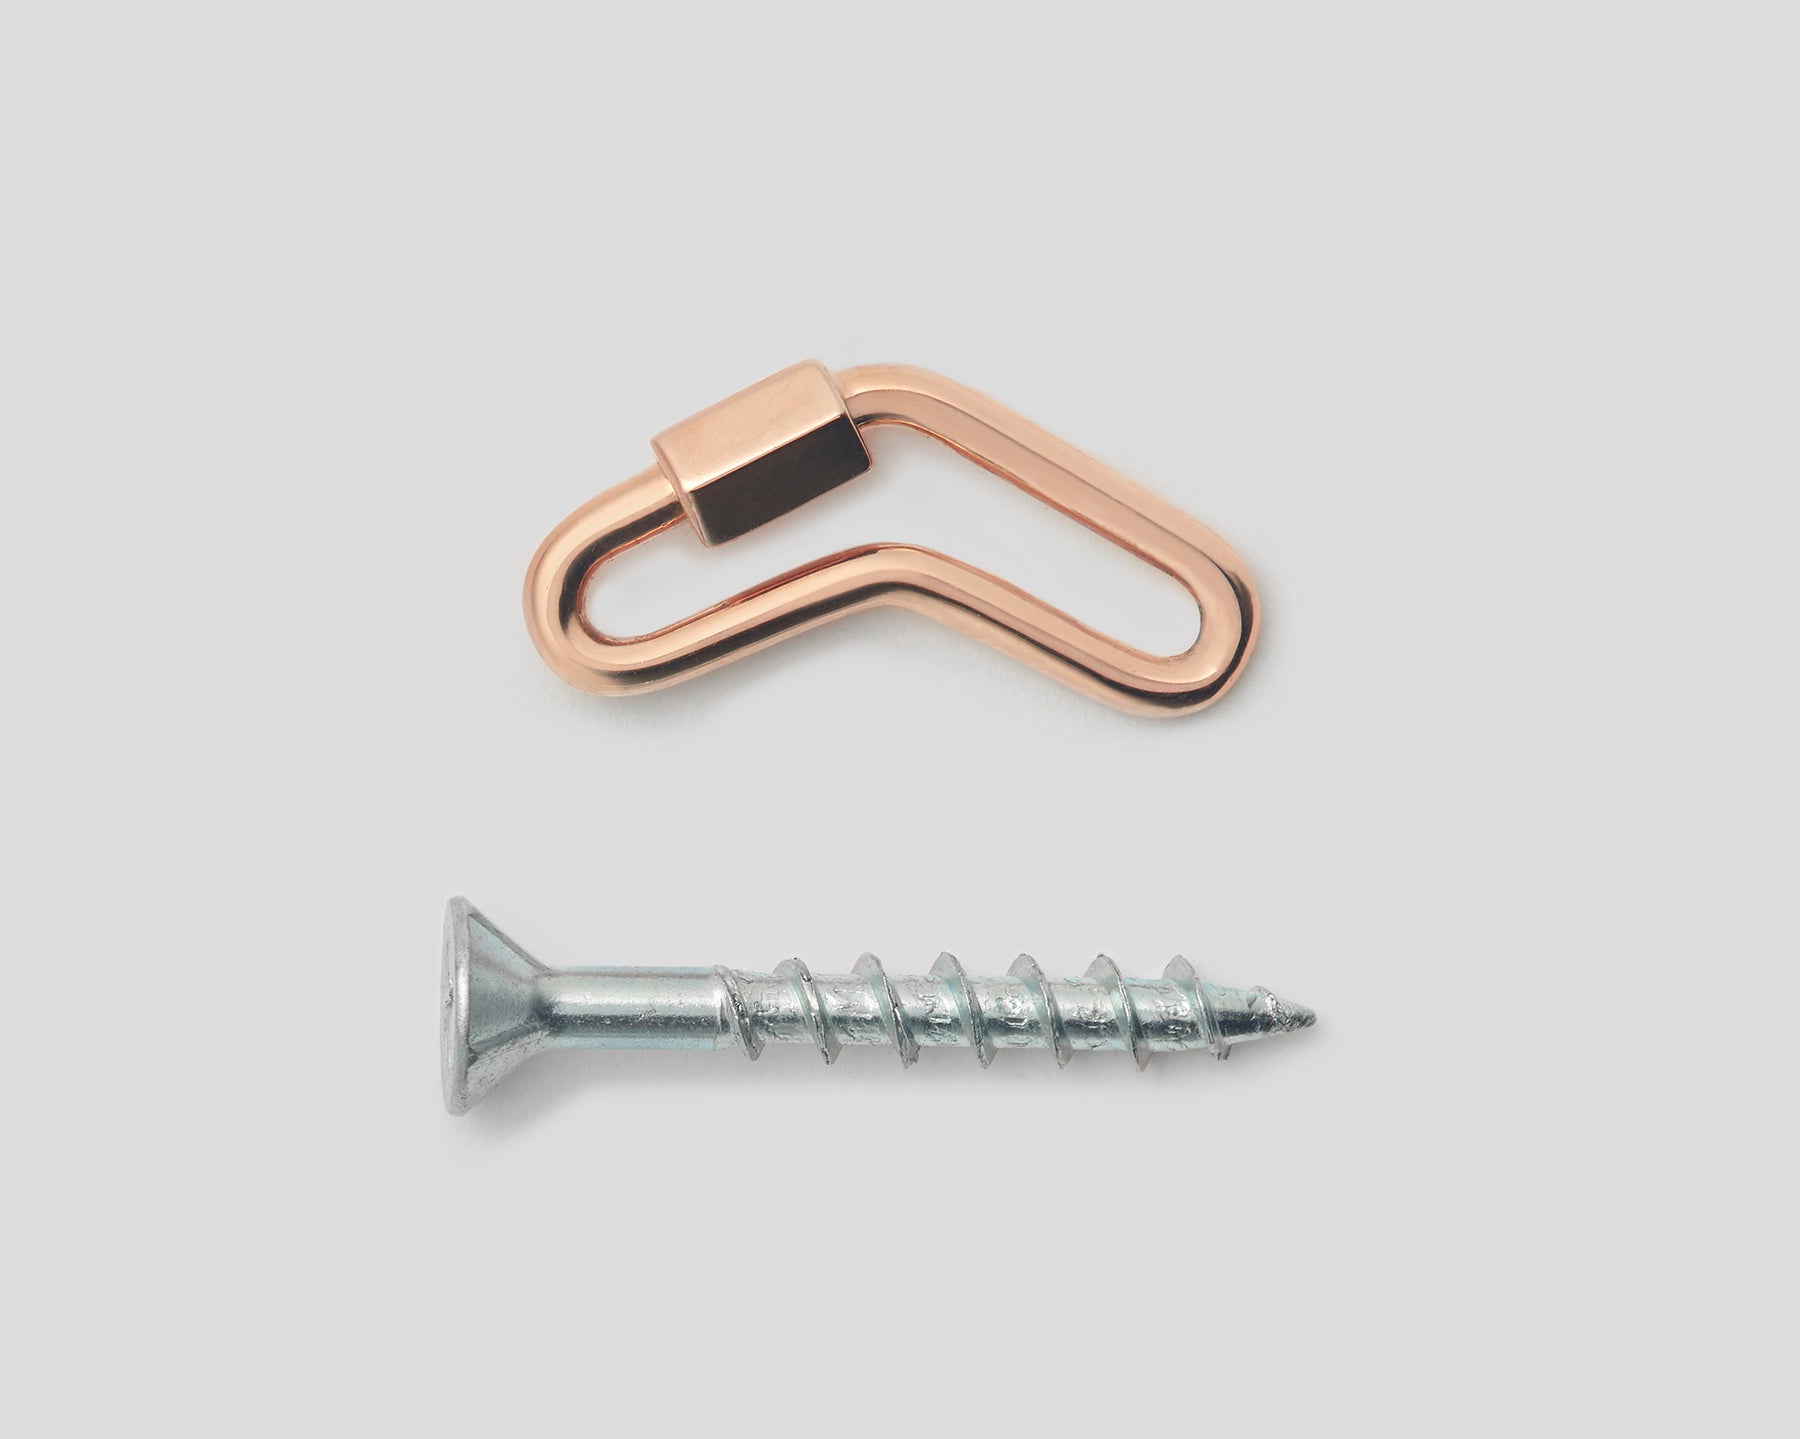 Rose gold boomerang lock charm with closed clasp alongside silver screw